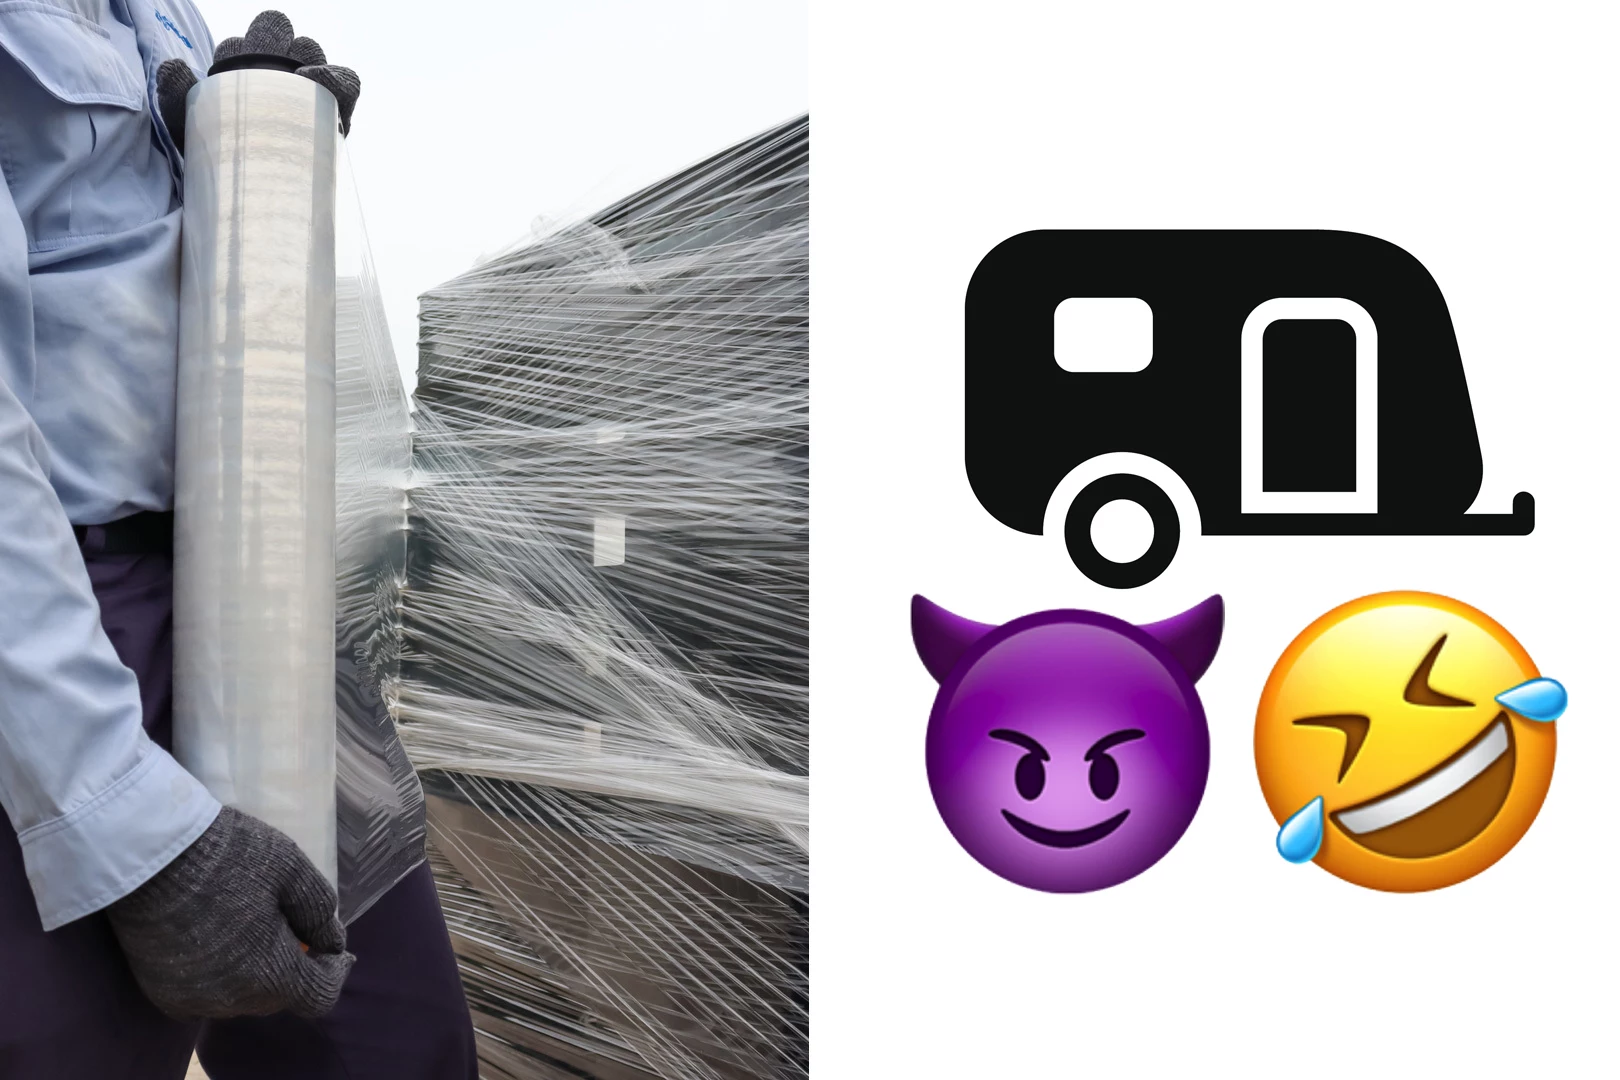 Plastic Wrapping a Tour Bus Trailer Is a Devilishly Funny Prank